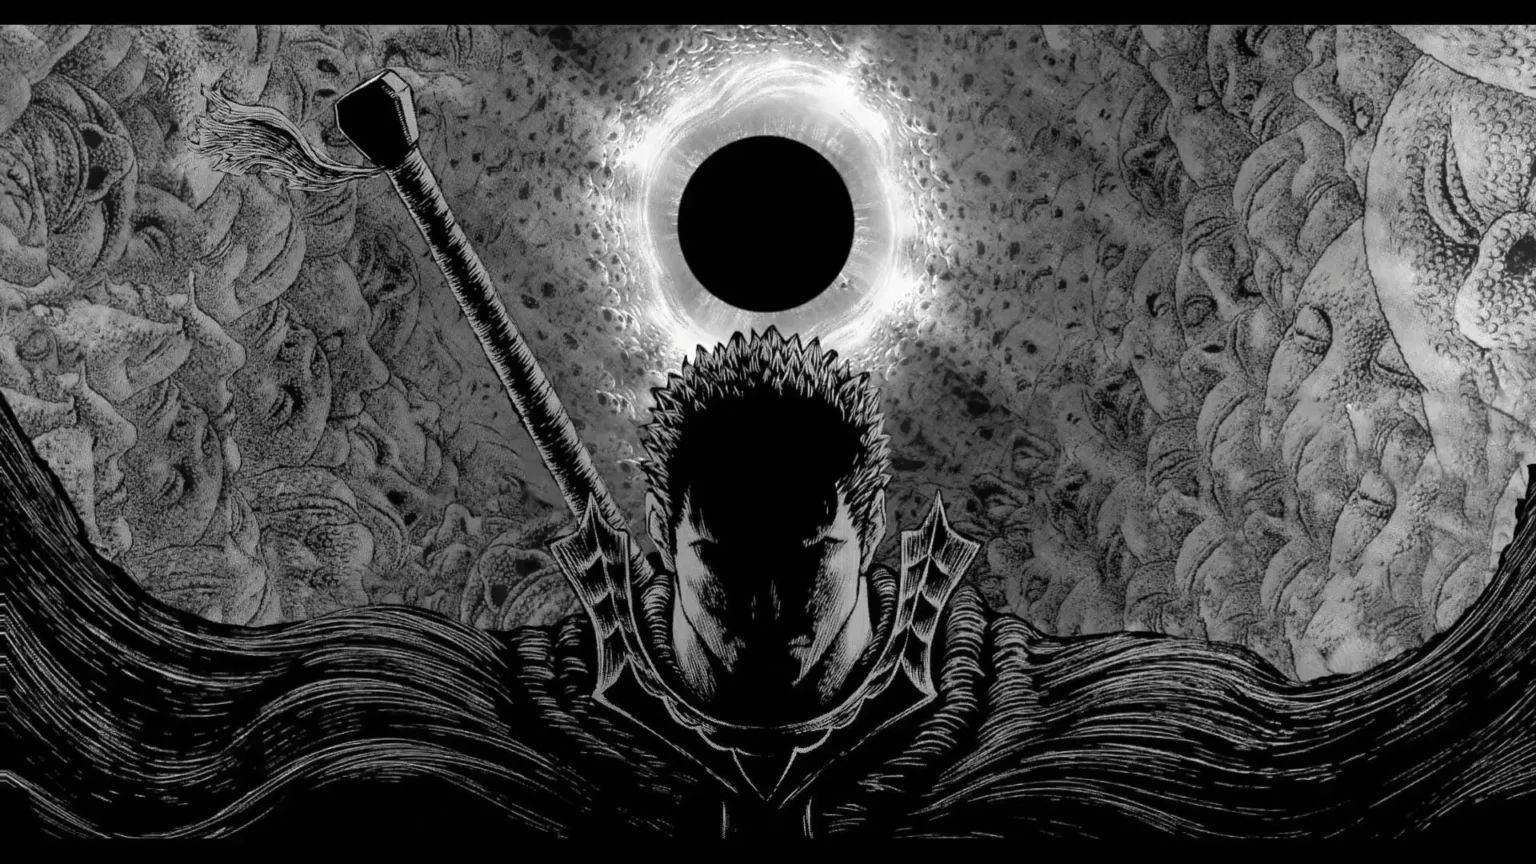 Berserk chapter 375: Release date and time, where to read, and more